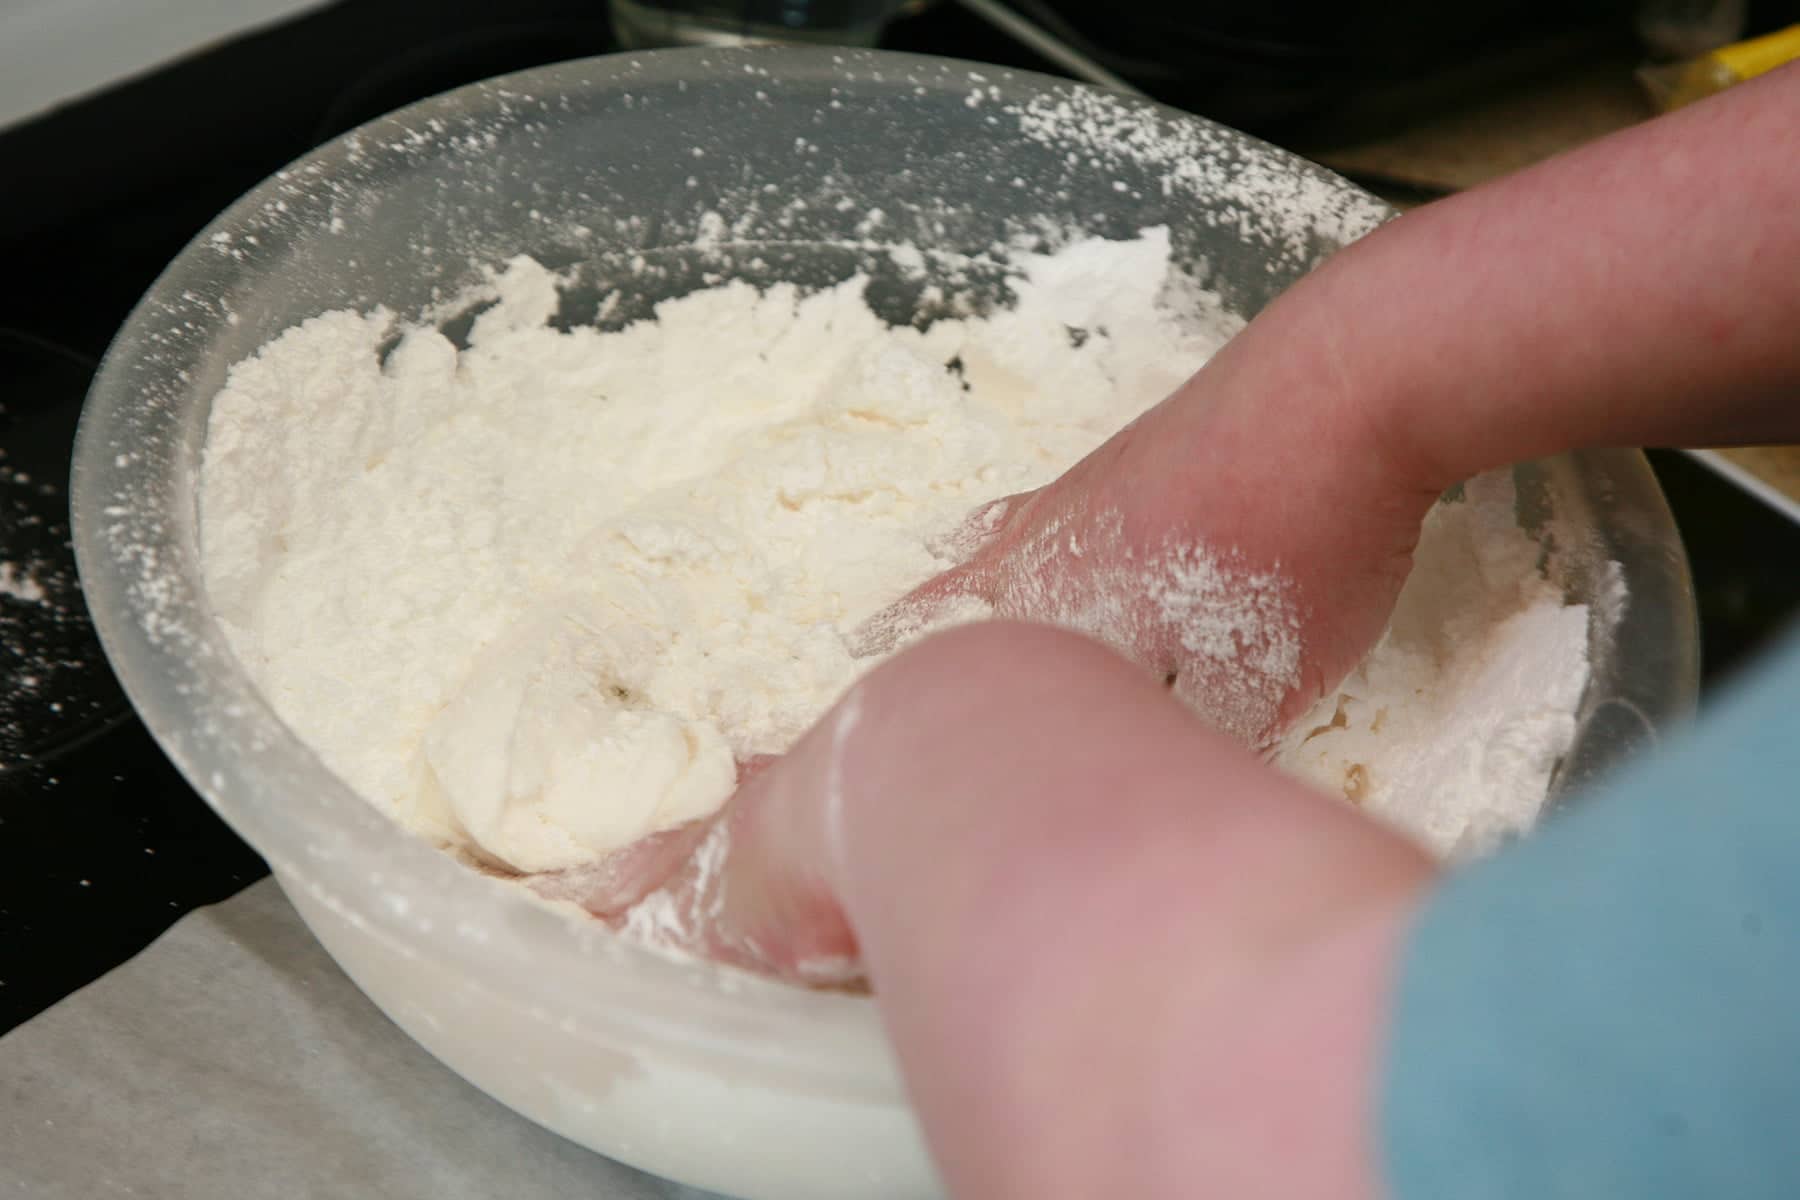 Two hands knead a mass of white marshmallow fondant in a large bowl of powdered sugar.